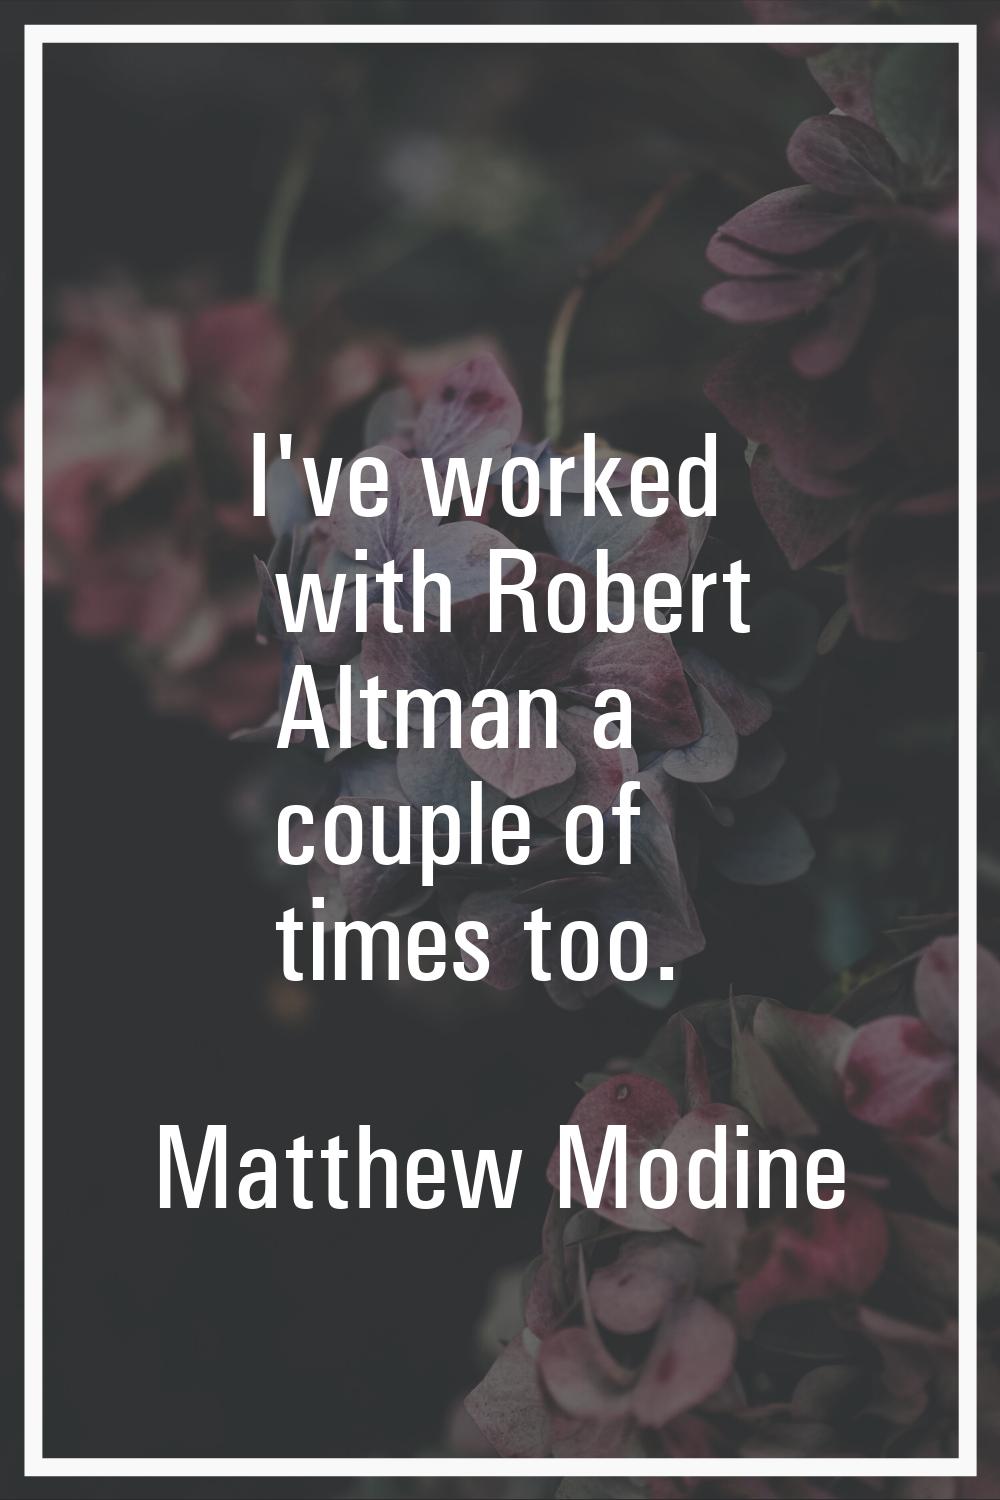 I've worked with Robert Altman a couple of times too.